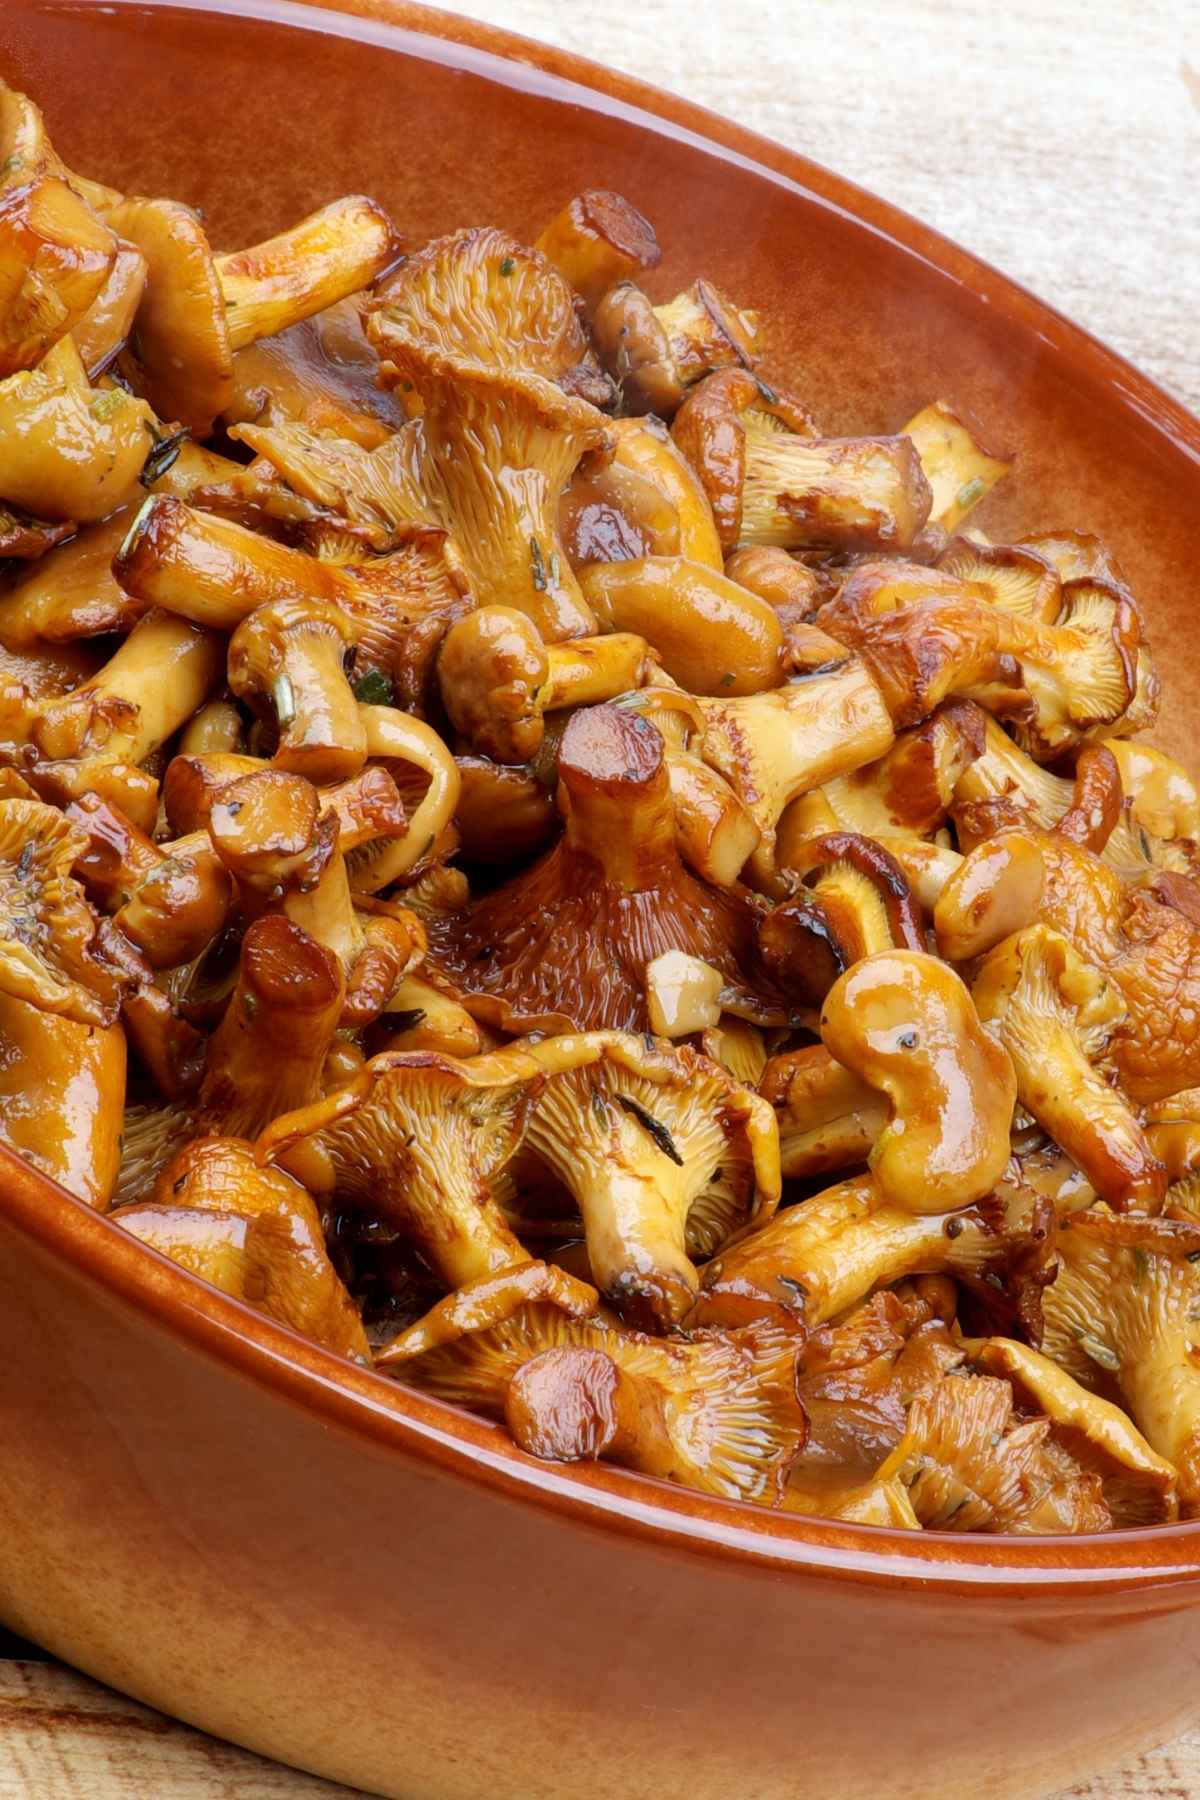 Pan seared Chanterelle Mushrooms with Garlic is a delicious dish that will complement anything you’re making. Serve it alongside chicken, meatloaf, or pork chops, or make a vegetarian meal by enjoying it with your favorite pasta dish!